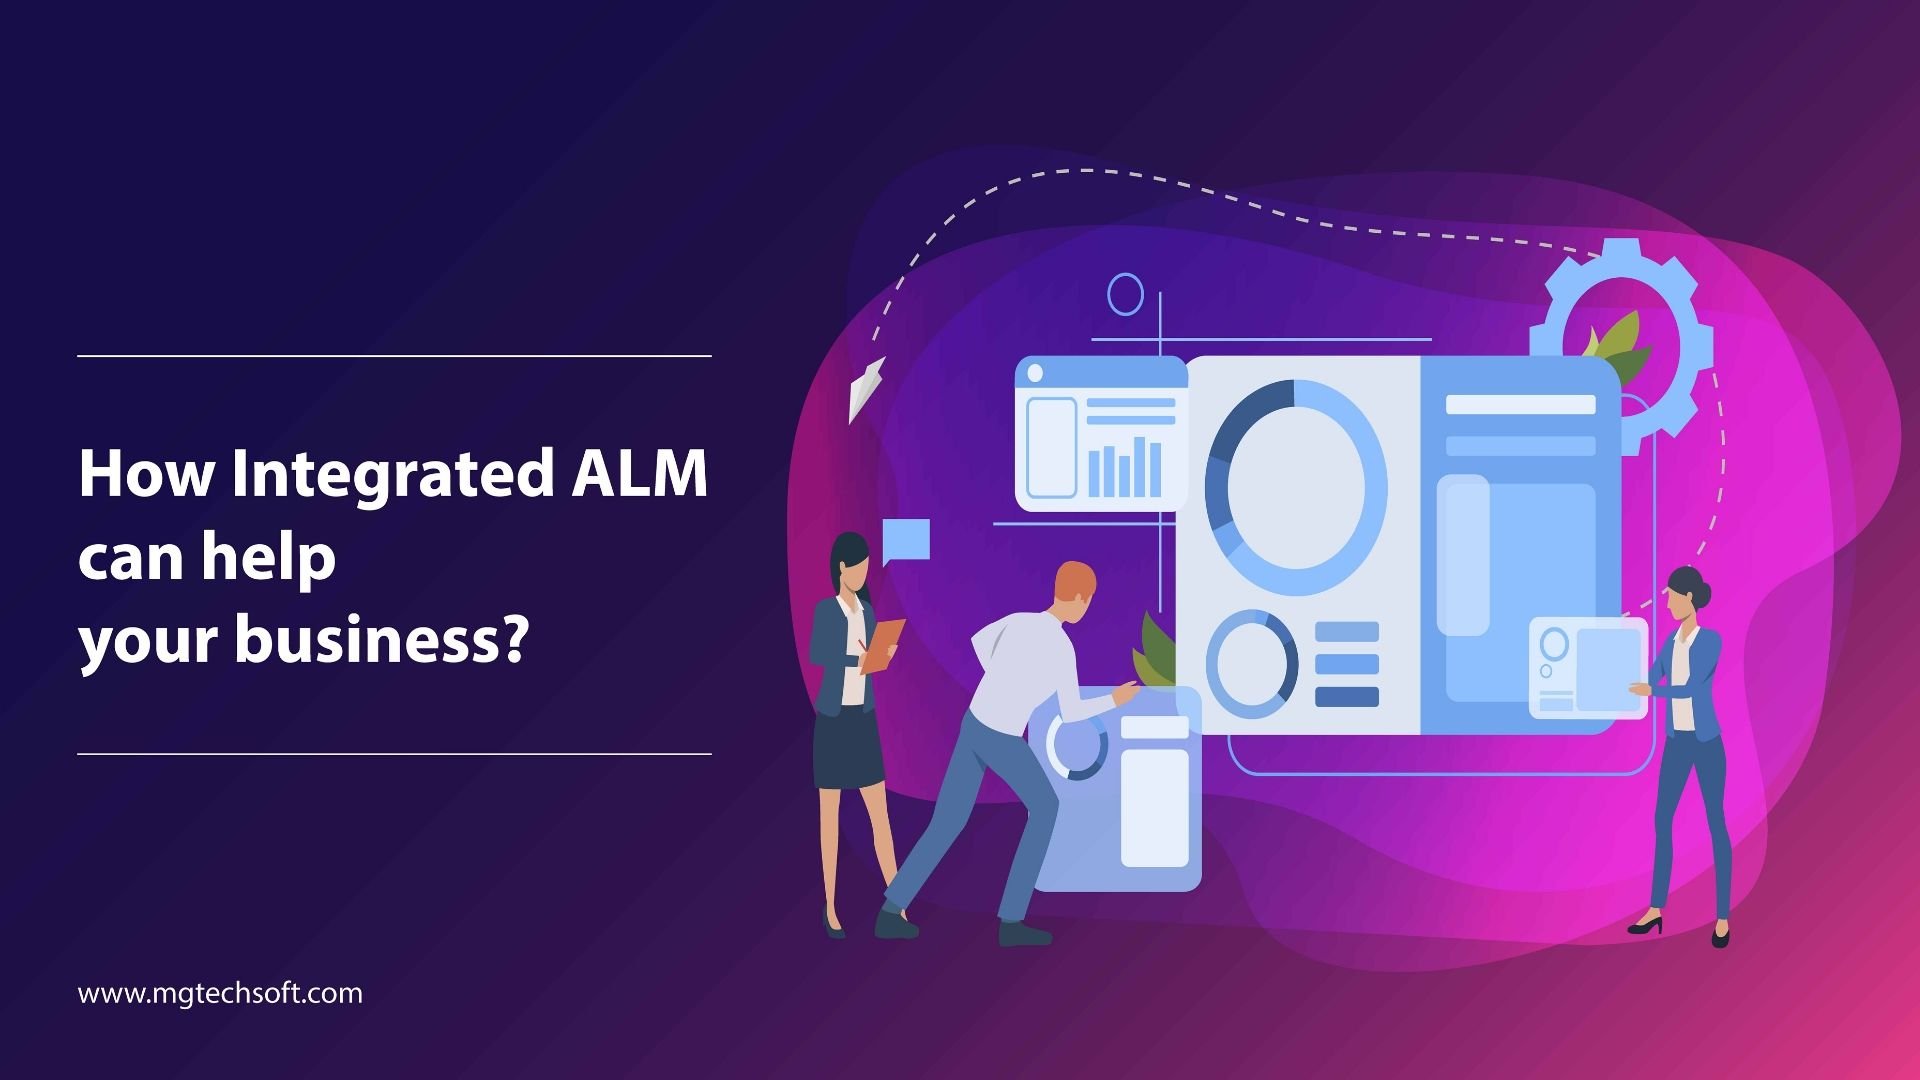 How integrated ALM can help your business?